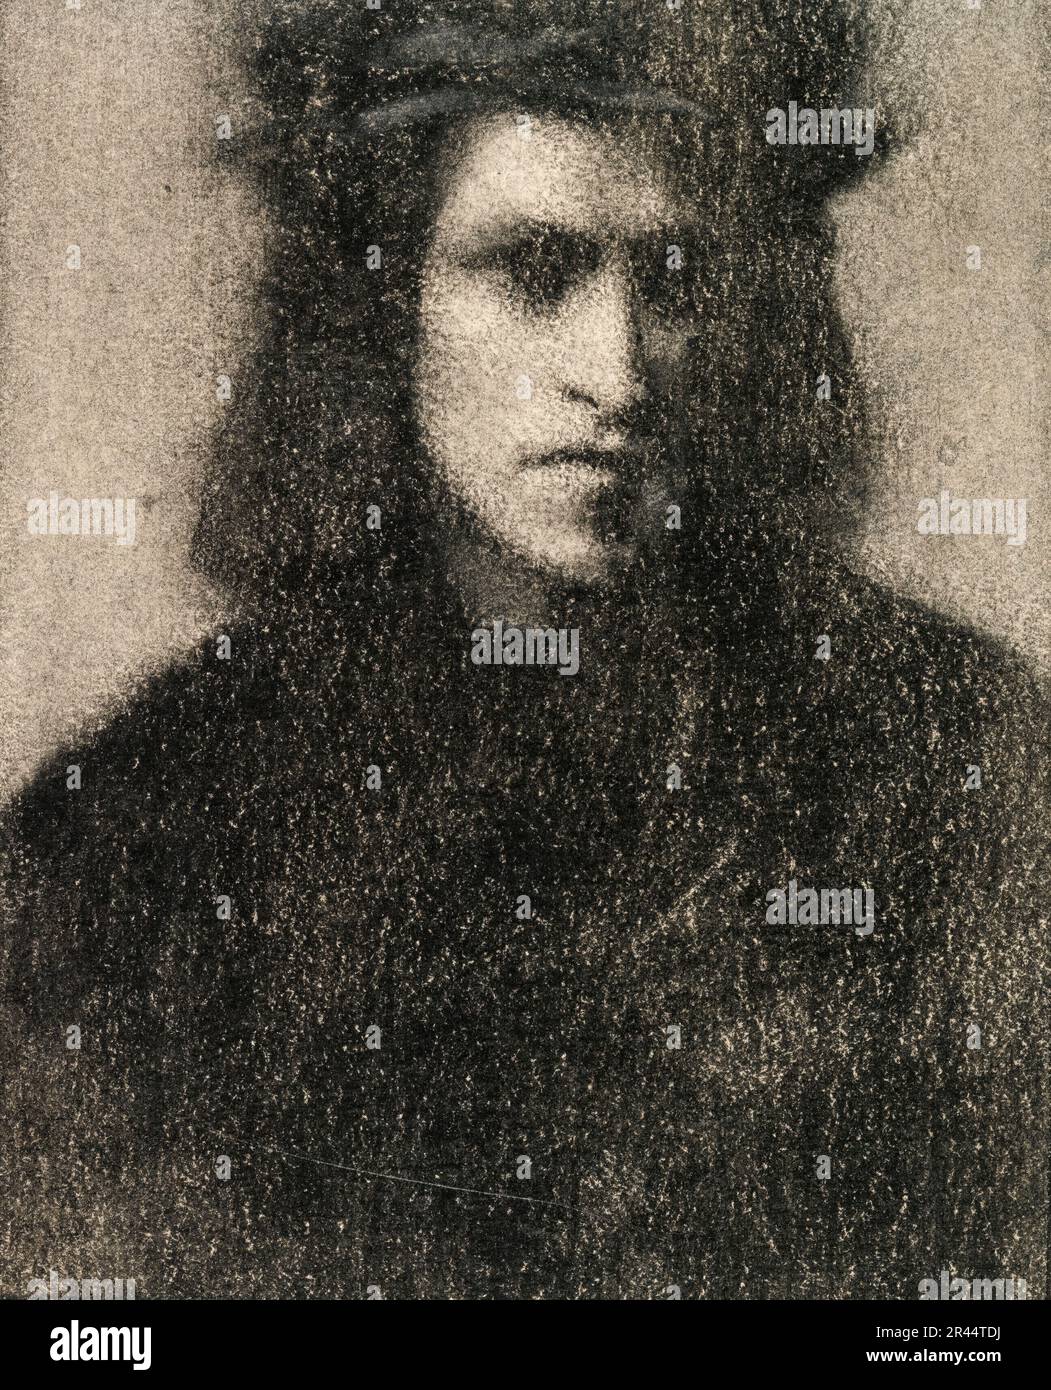 Fernand Khnopff, Young man in renaissance dress, portrait drawing circa 1914 Stock Photo